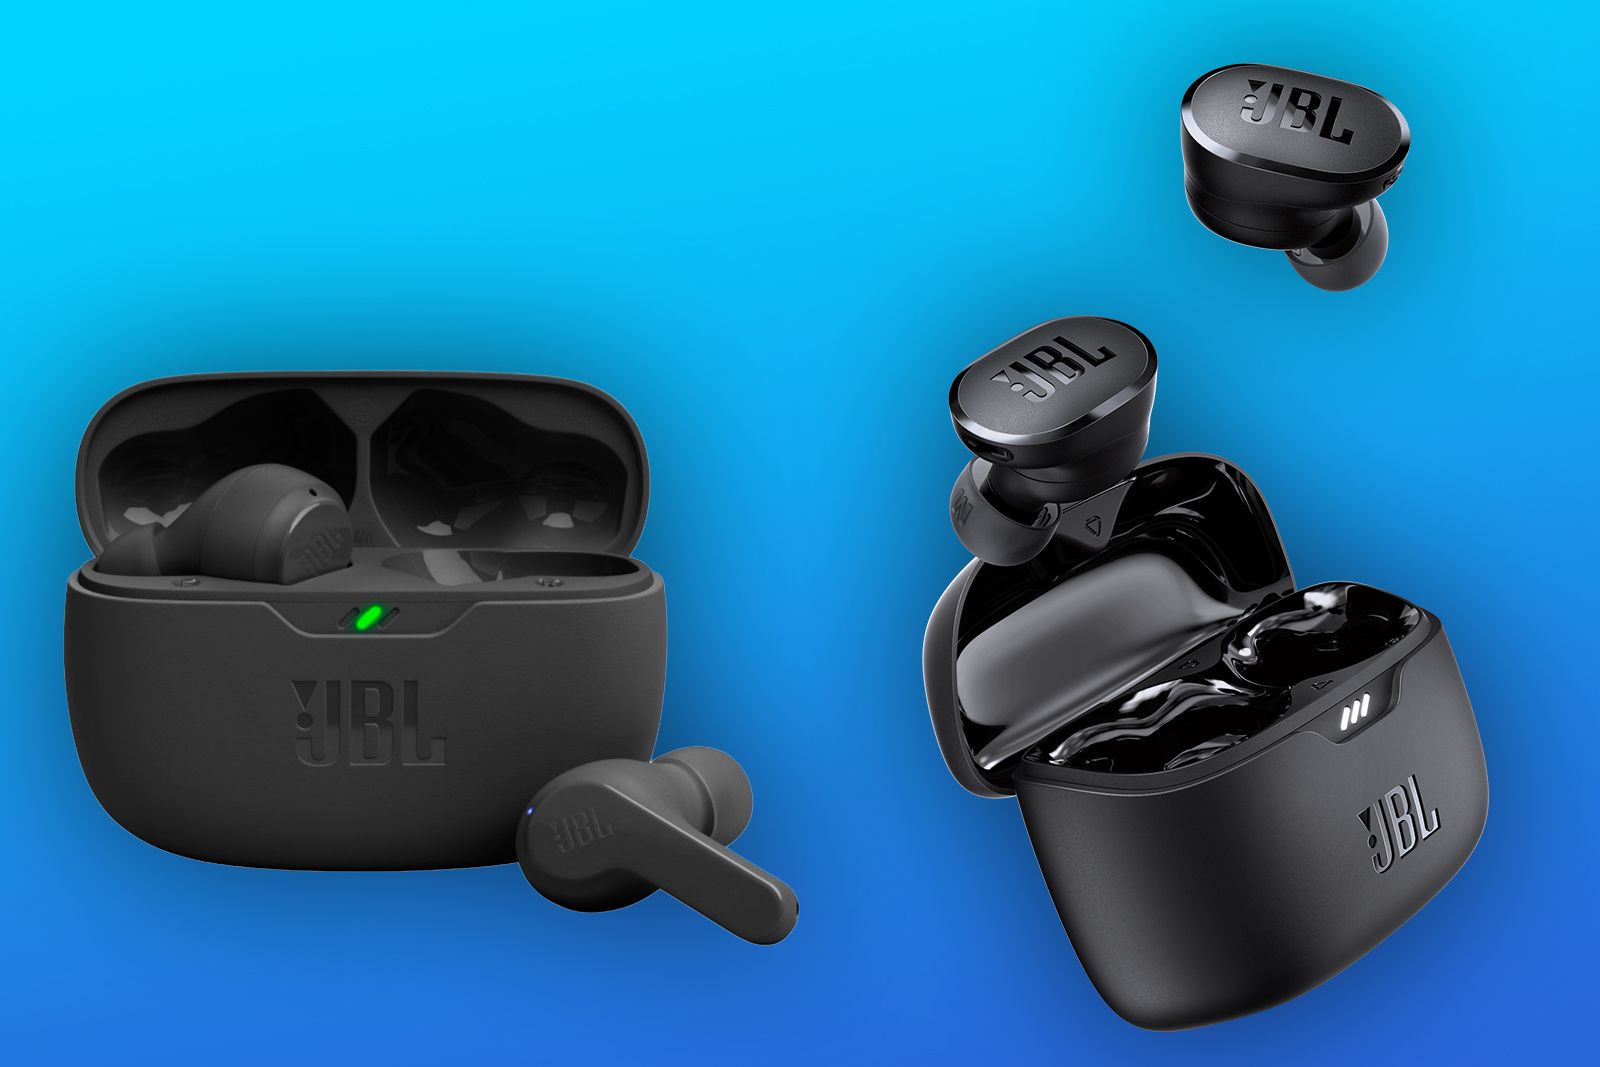 JBL launches a plethora of new true wireless earbuds at CES 2023 photo 1